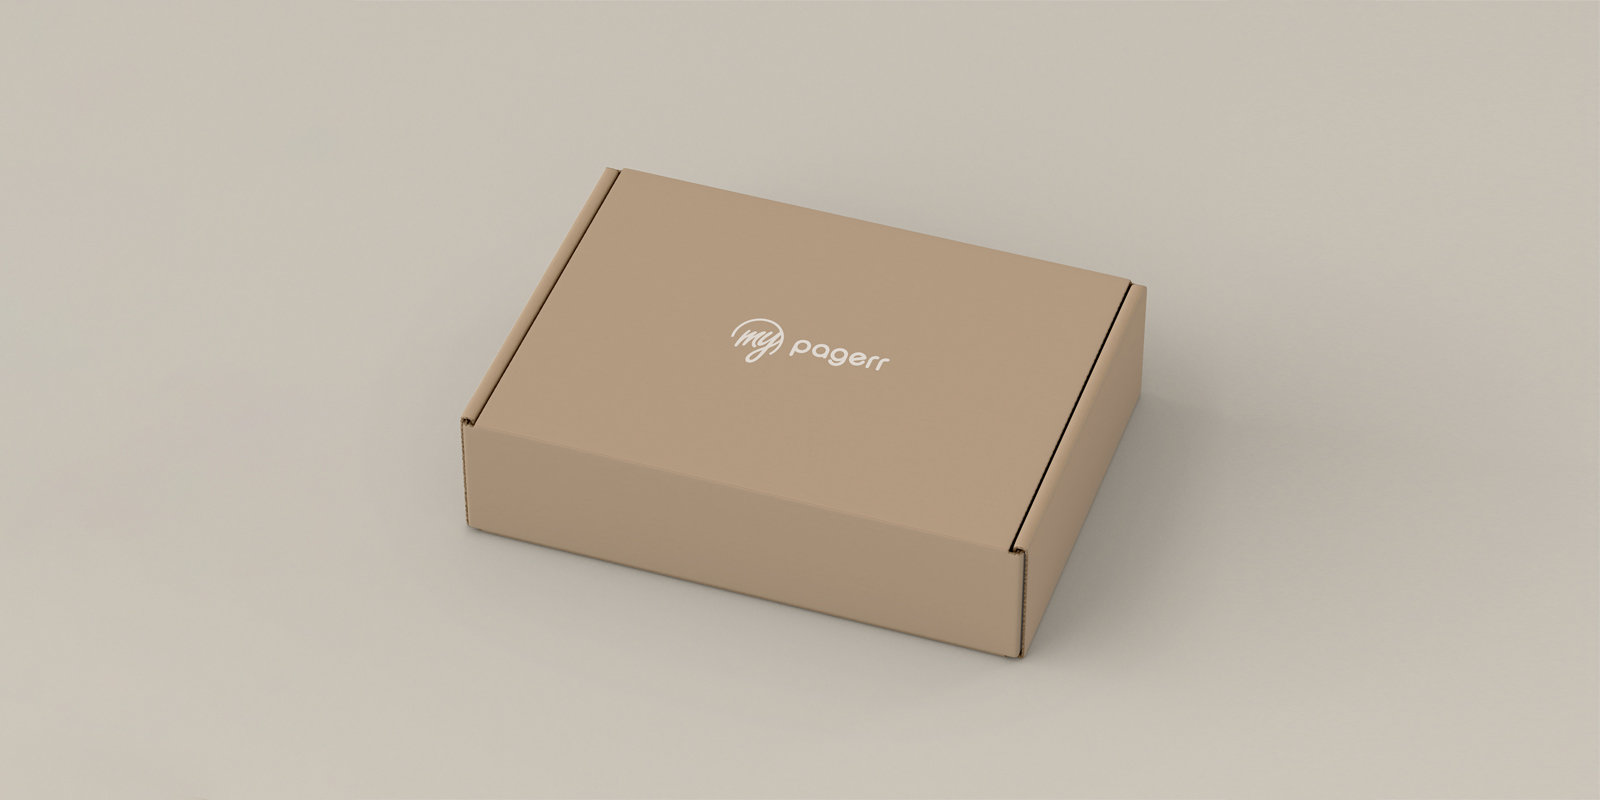 Bespoke boxes in Newcastle - Print with Pagerr